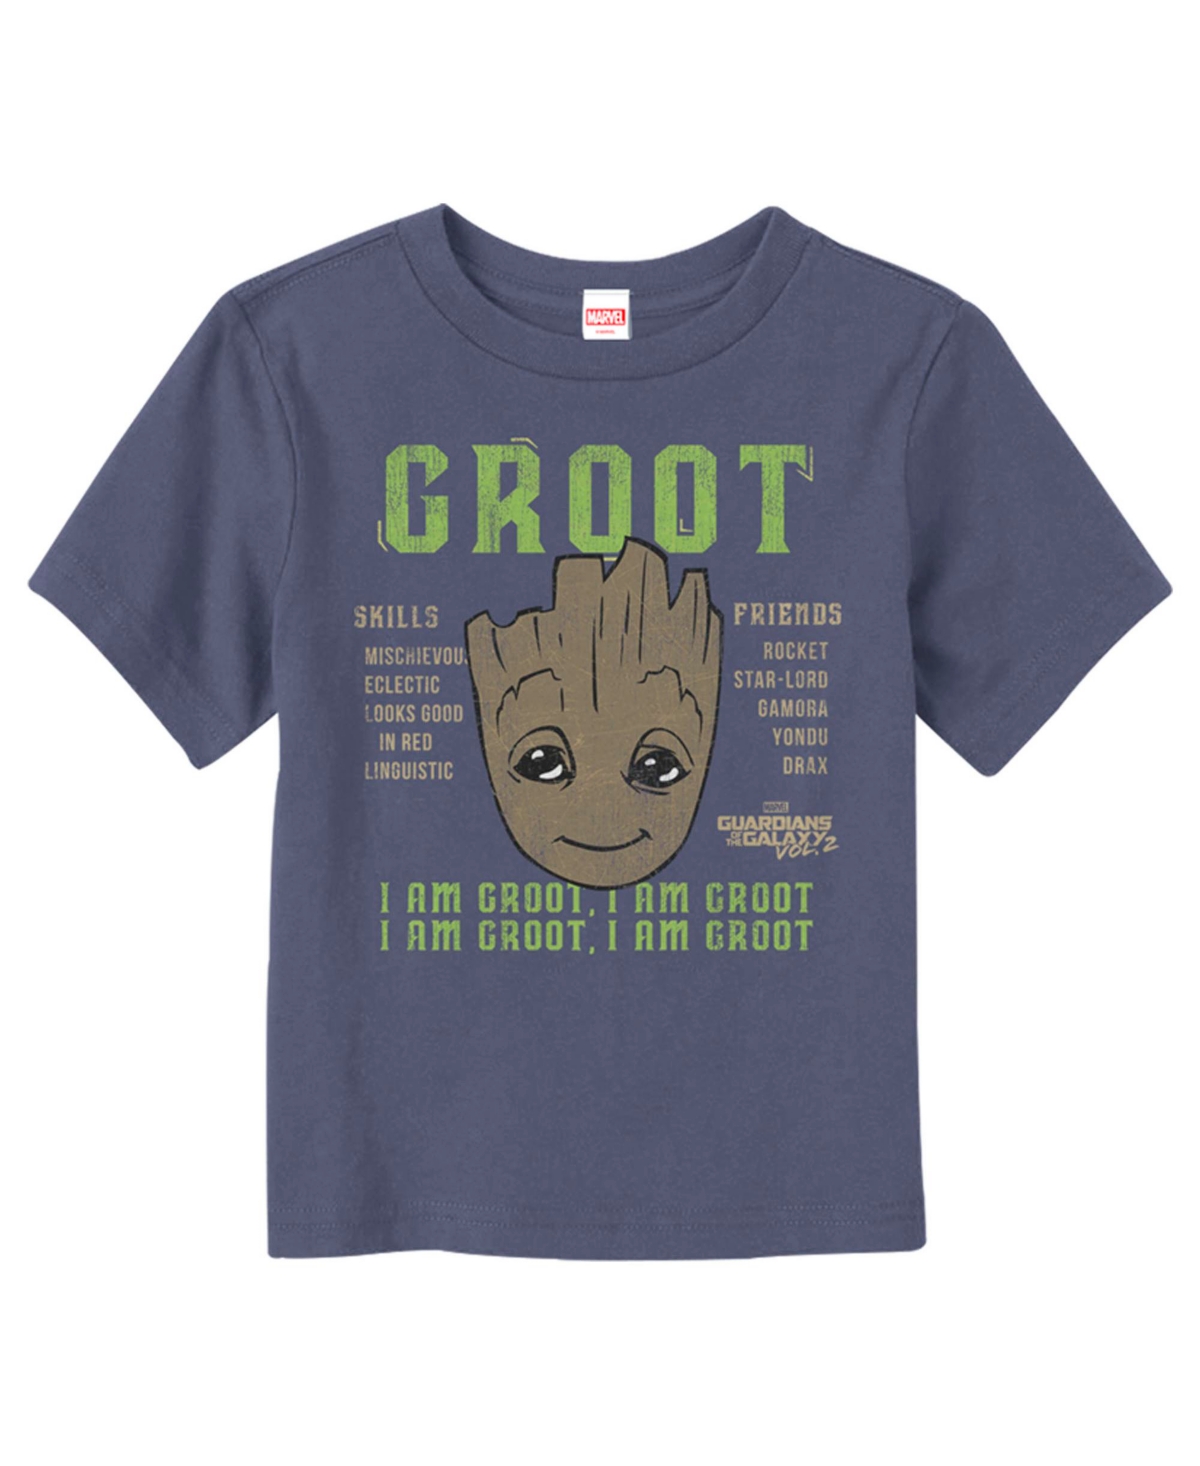 MARVEL TODDLER'S MARVEL GUARDIANS OF THE GALAXY VOL. 2 GROOT SKILLS UNISEX T-SHIRT